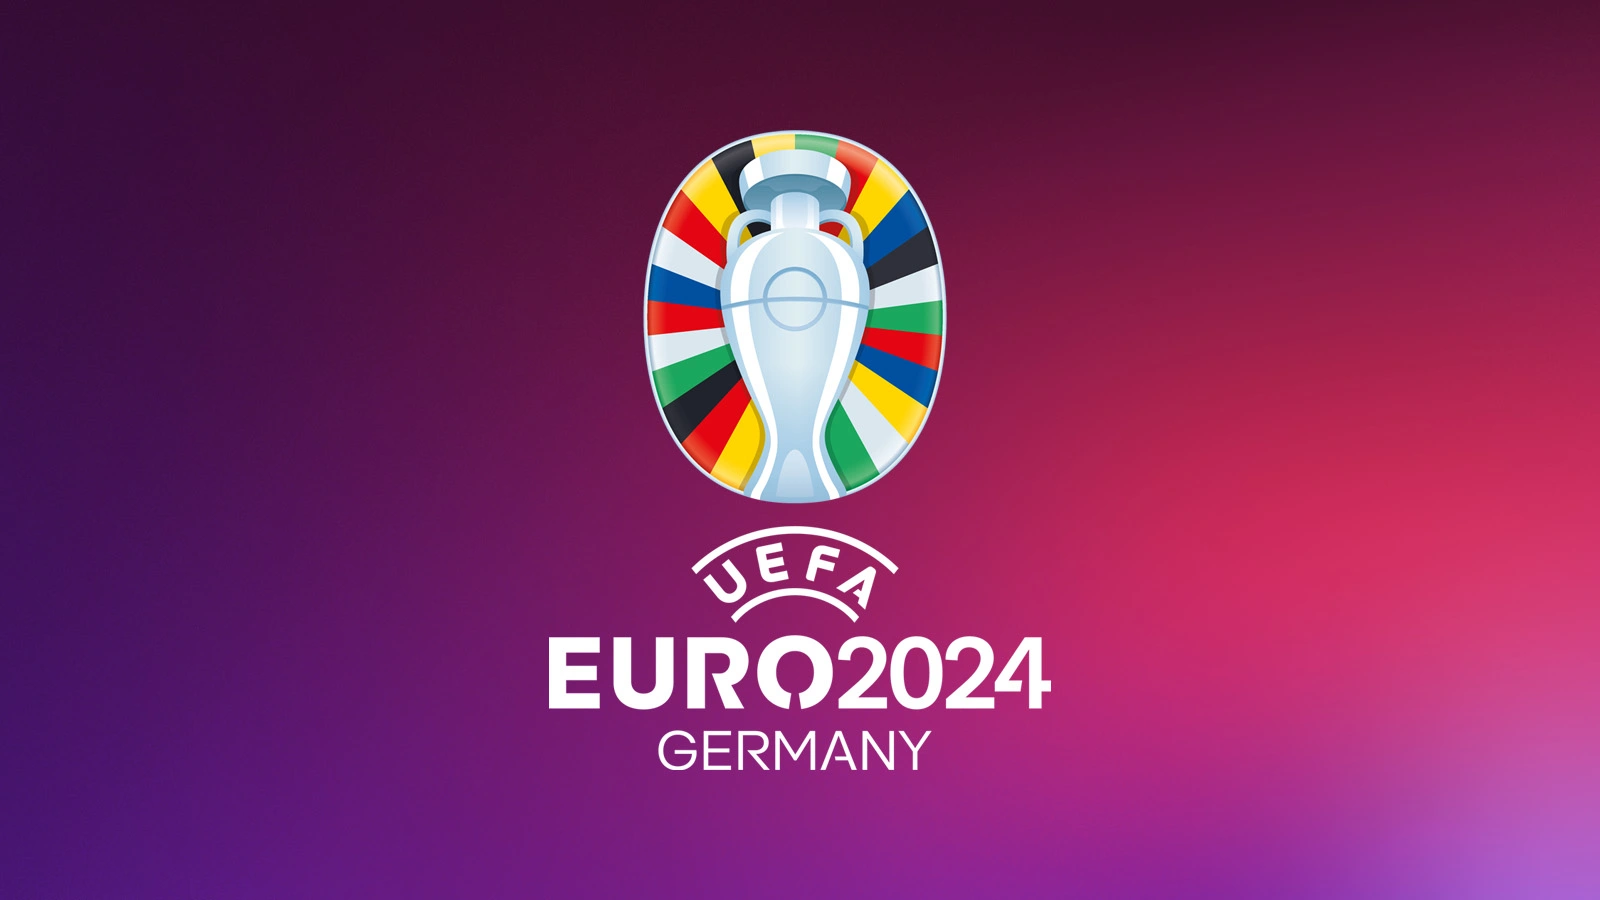 Venues for Euro 2024